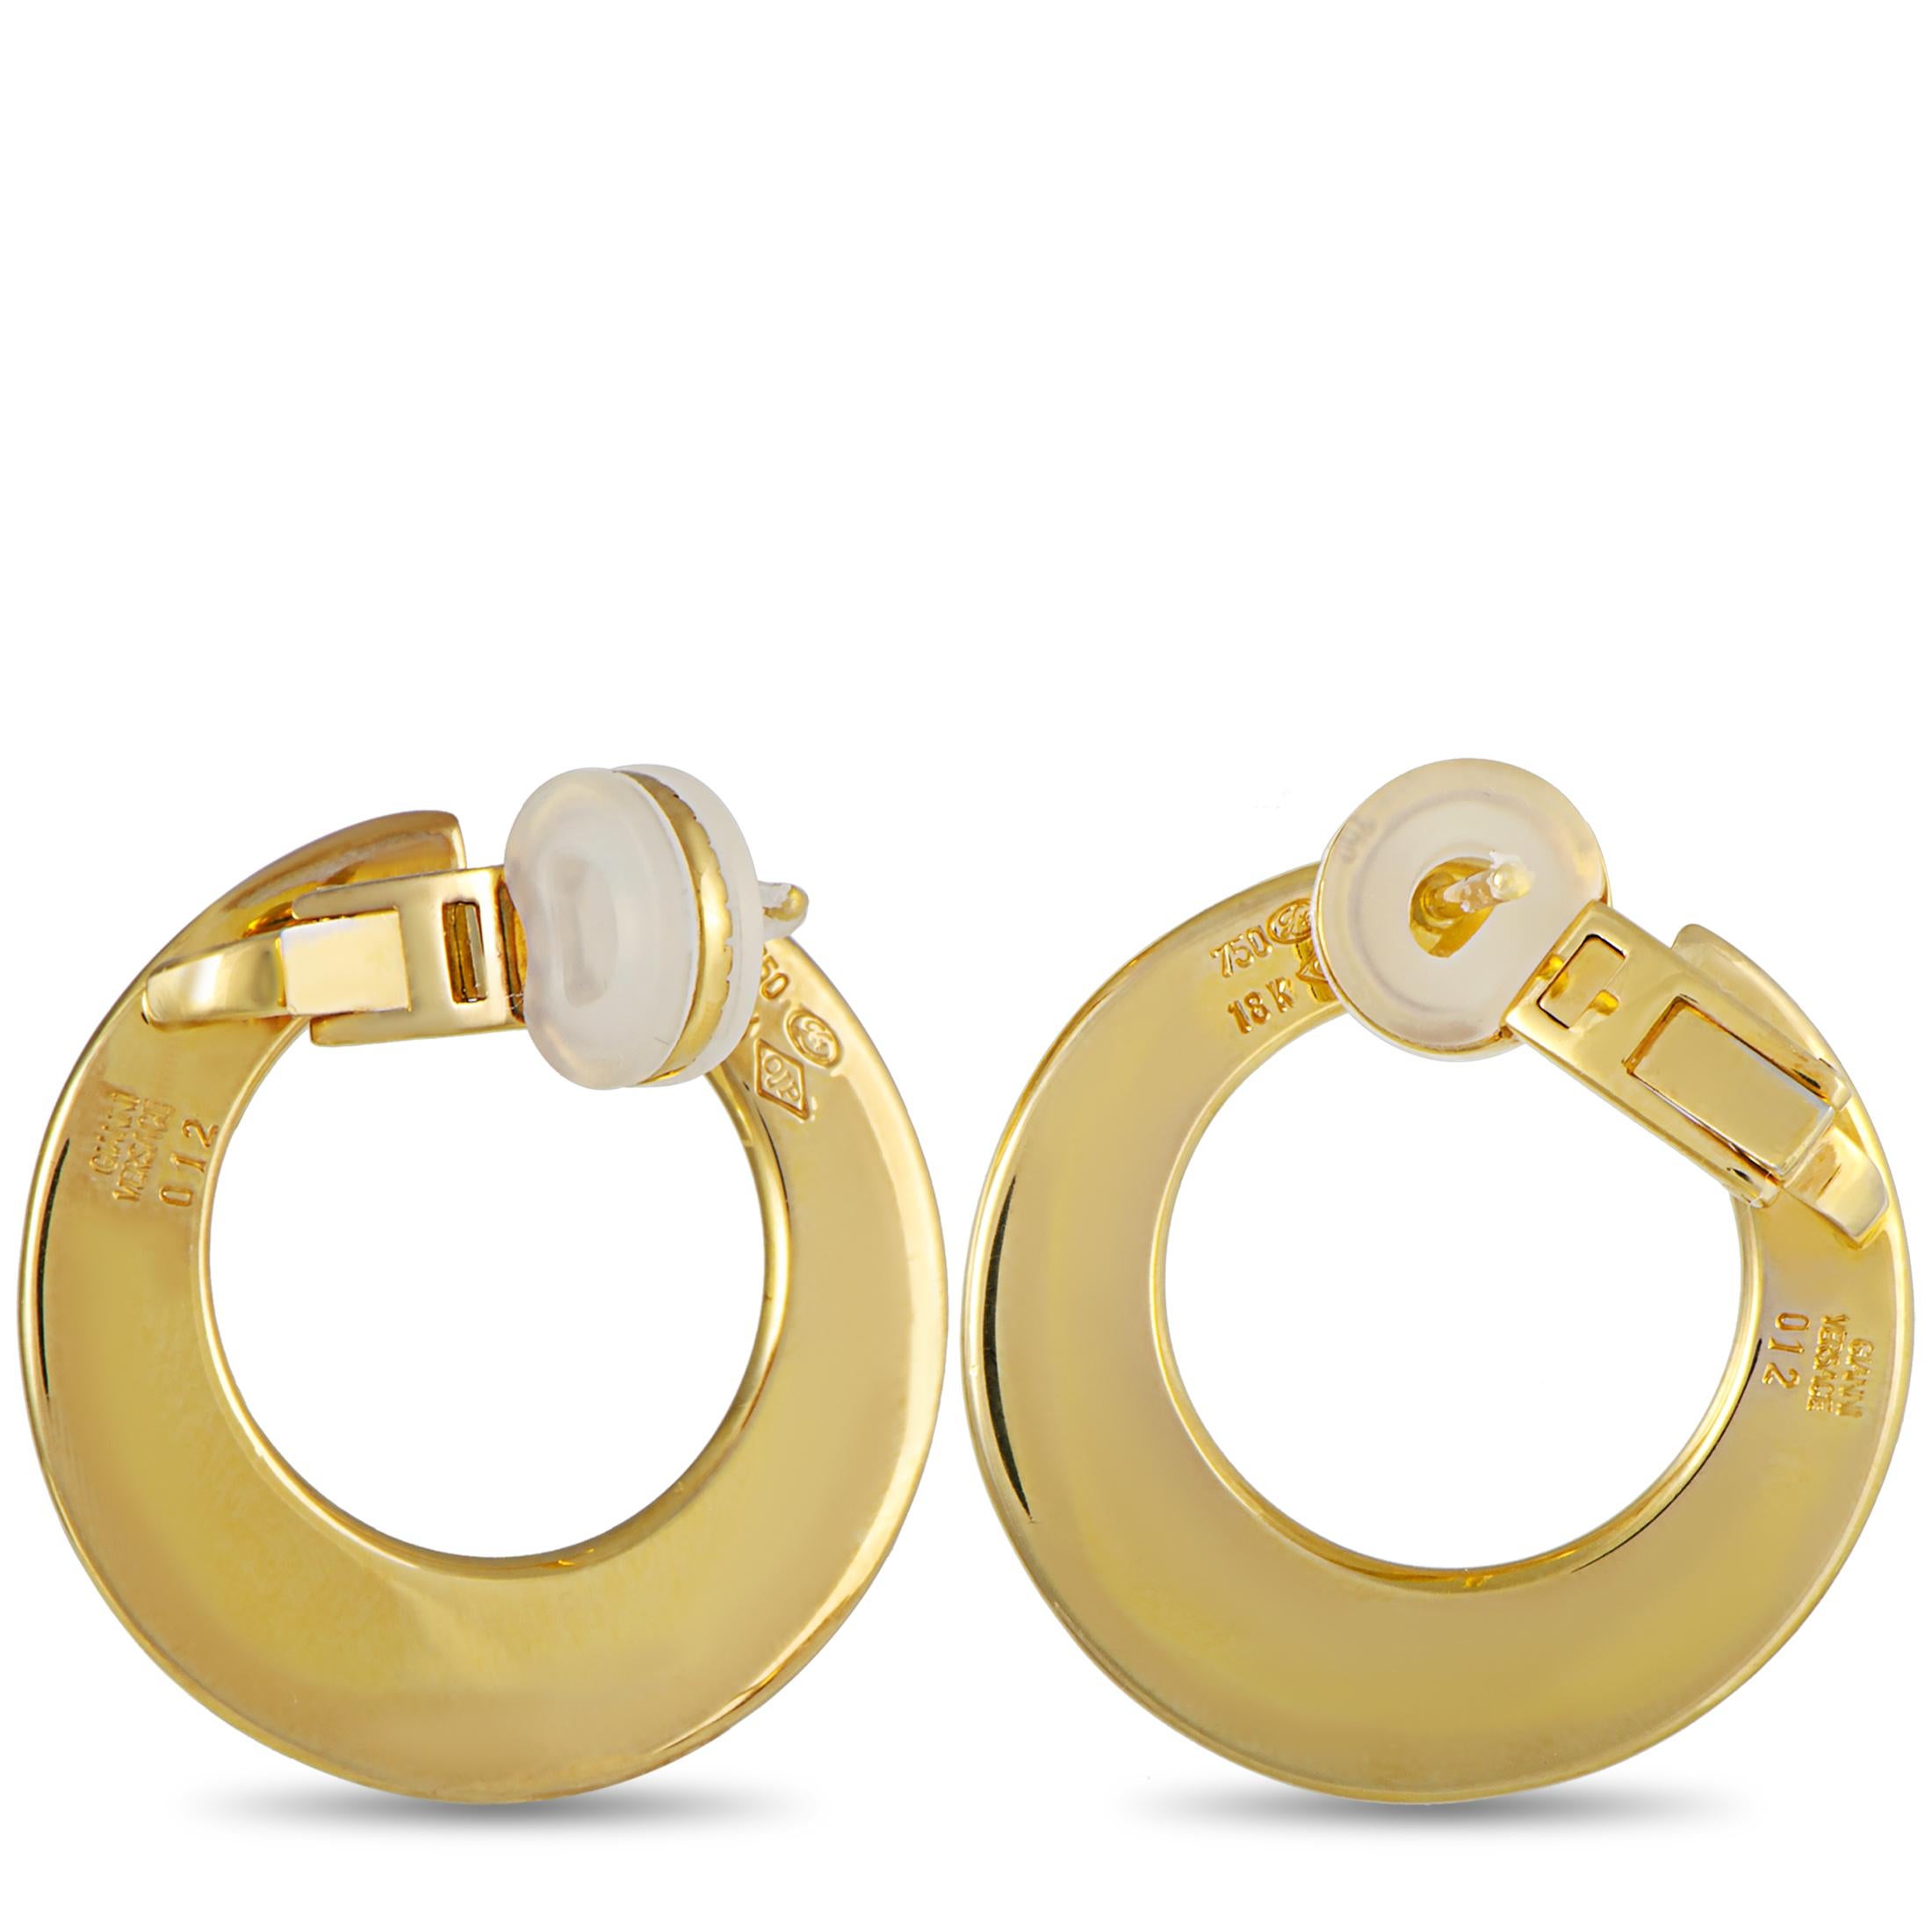 These vintage Versace earrings are made out of 18K yellow gold and enamel and each weighs 6.8 grams, measuring 1” by 1”.
The earrings include the manufacturer’s box.